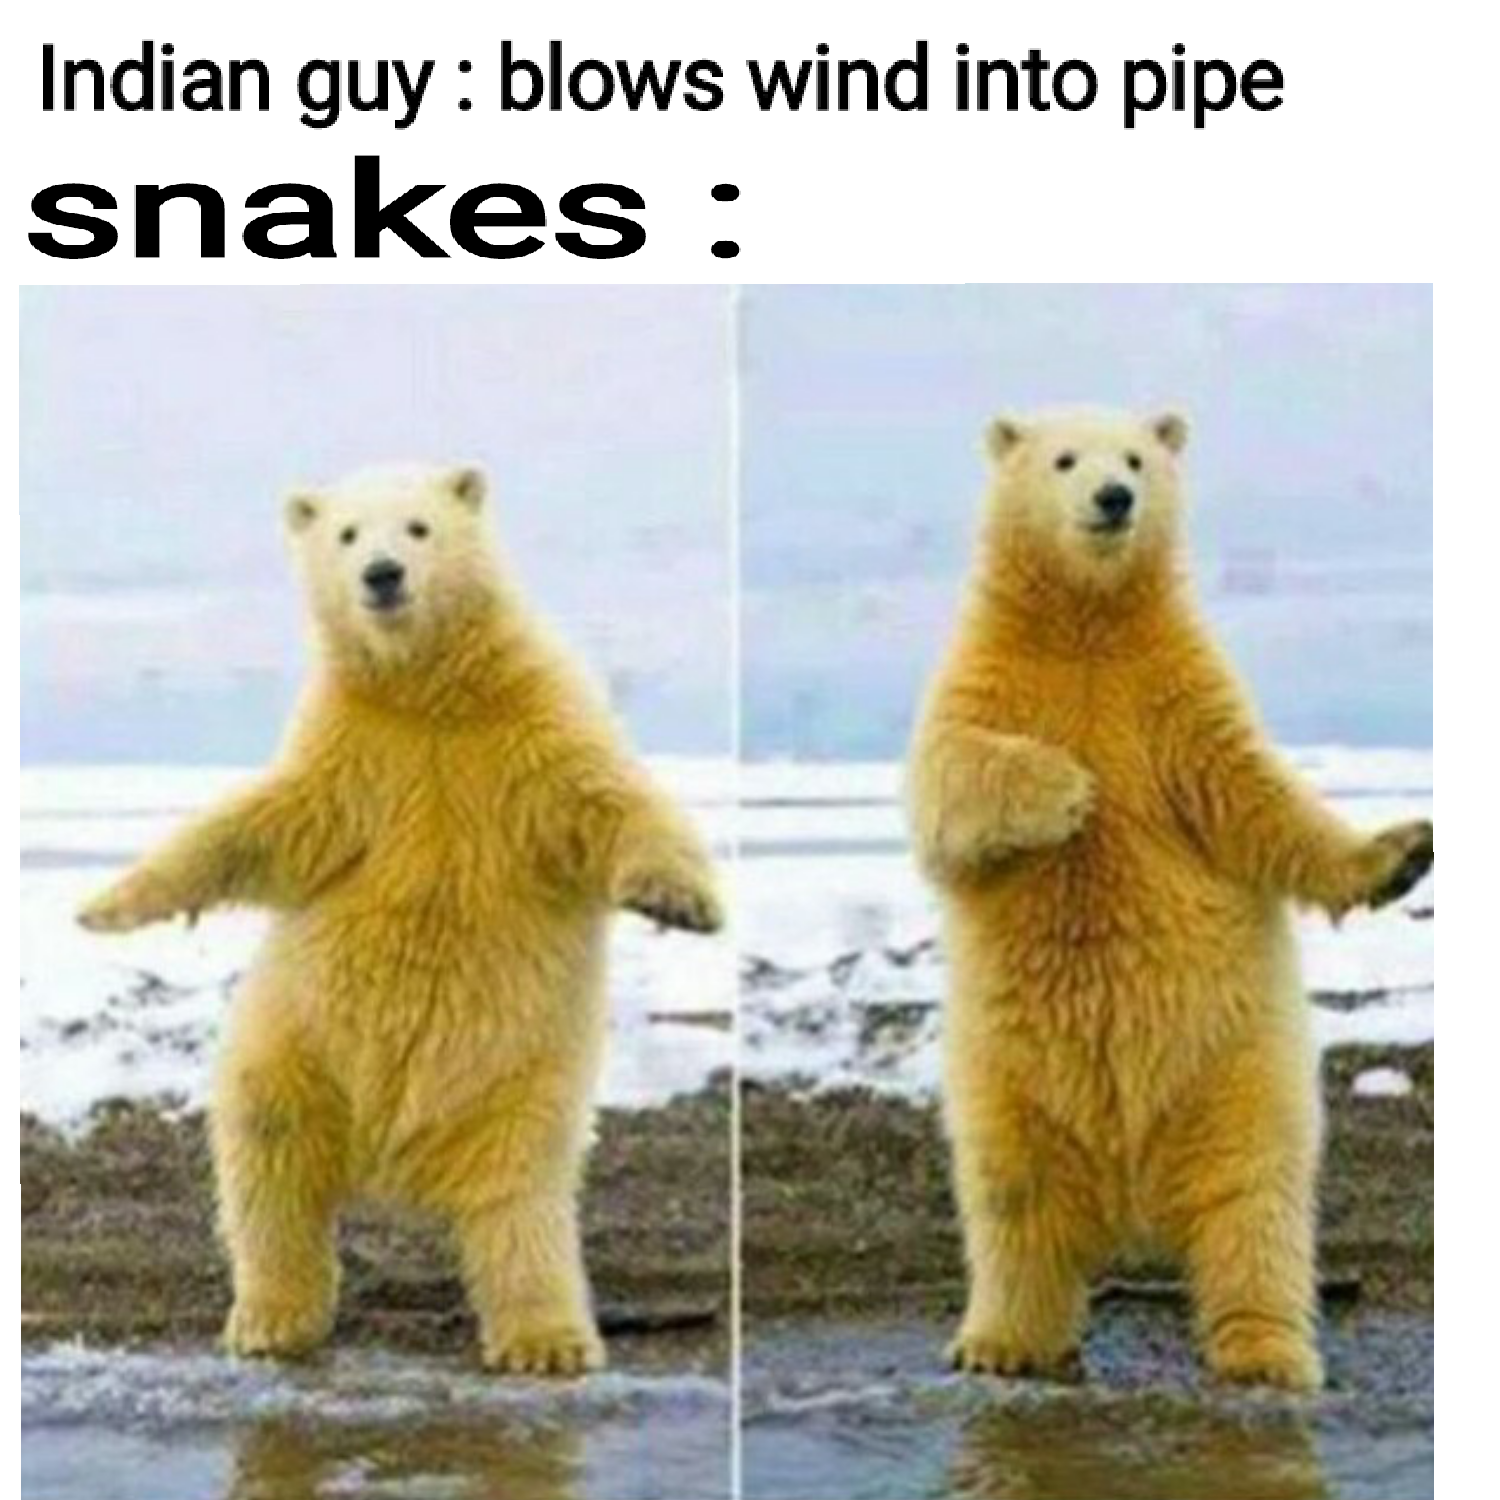 Indian guy blows wind into pipe snakes